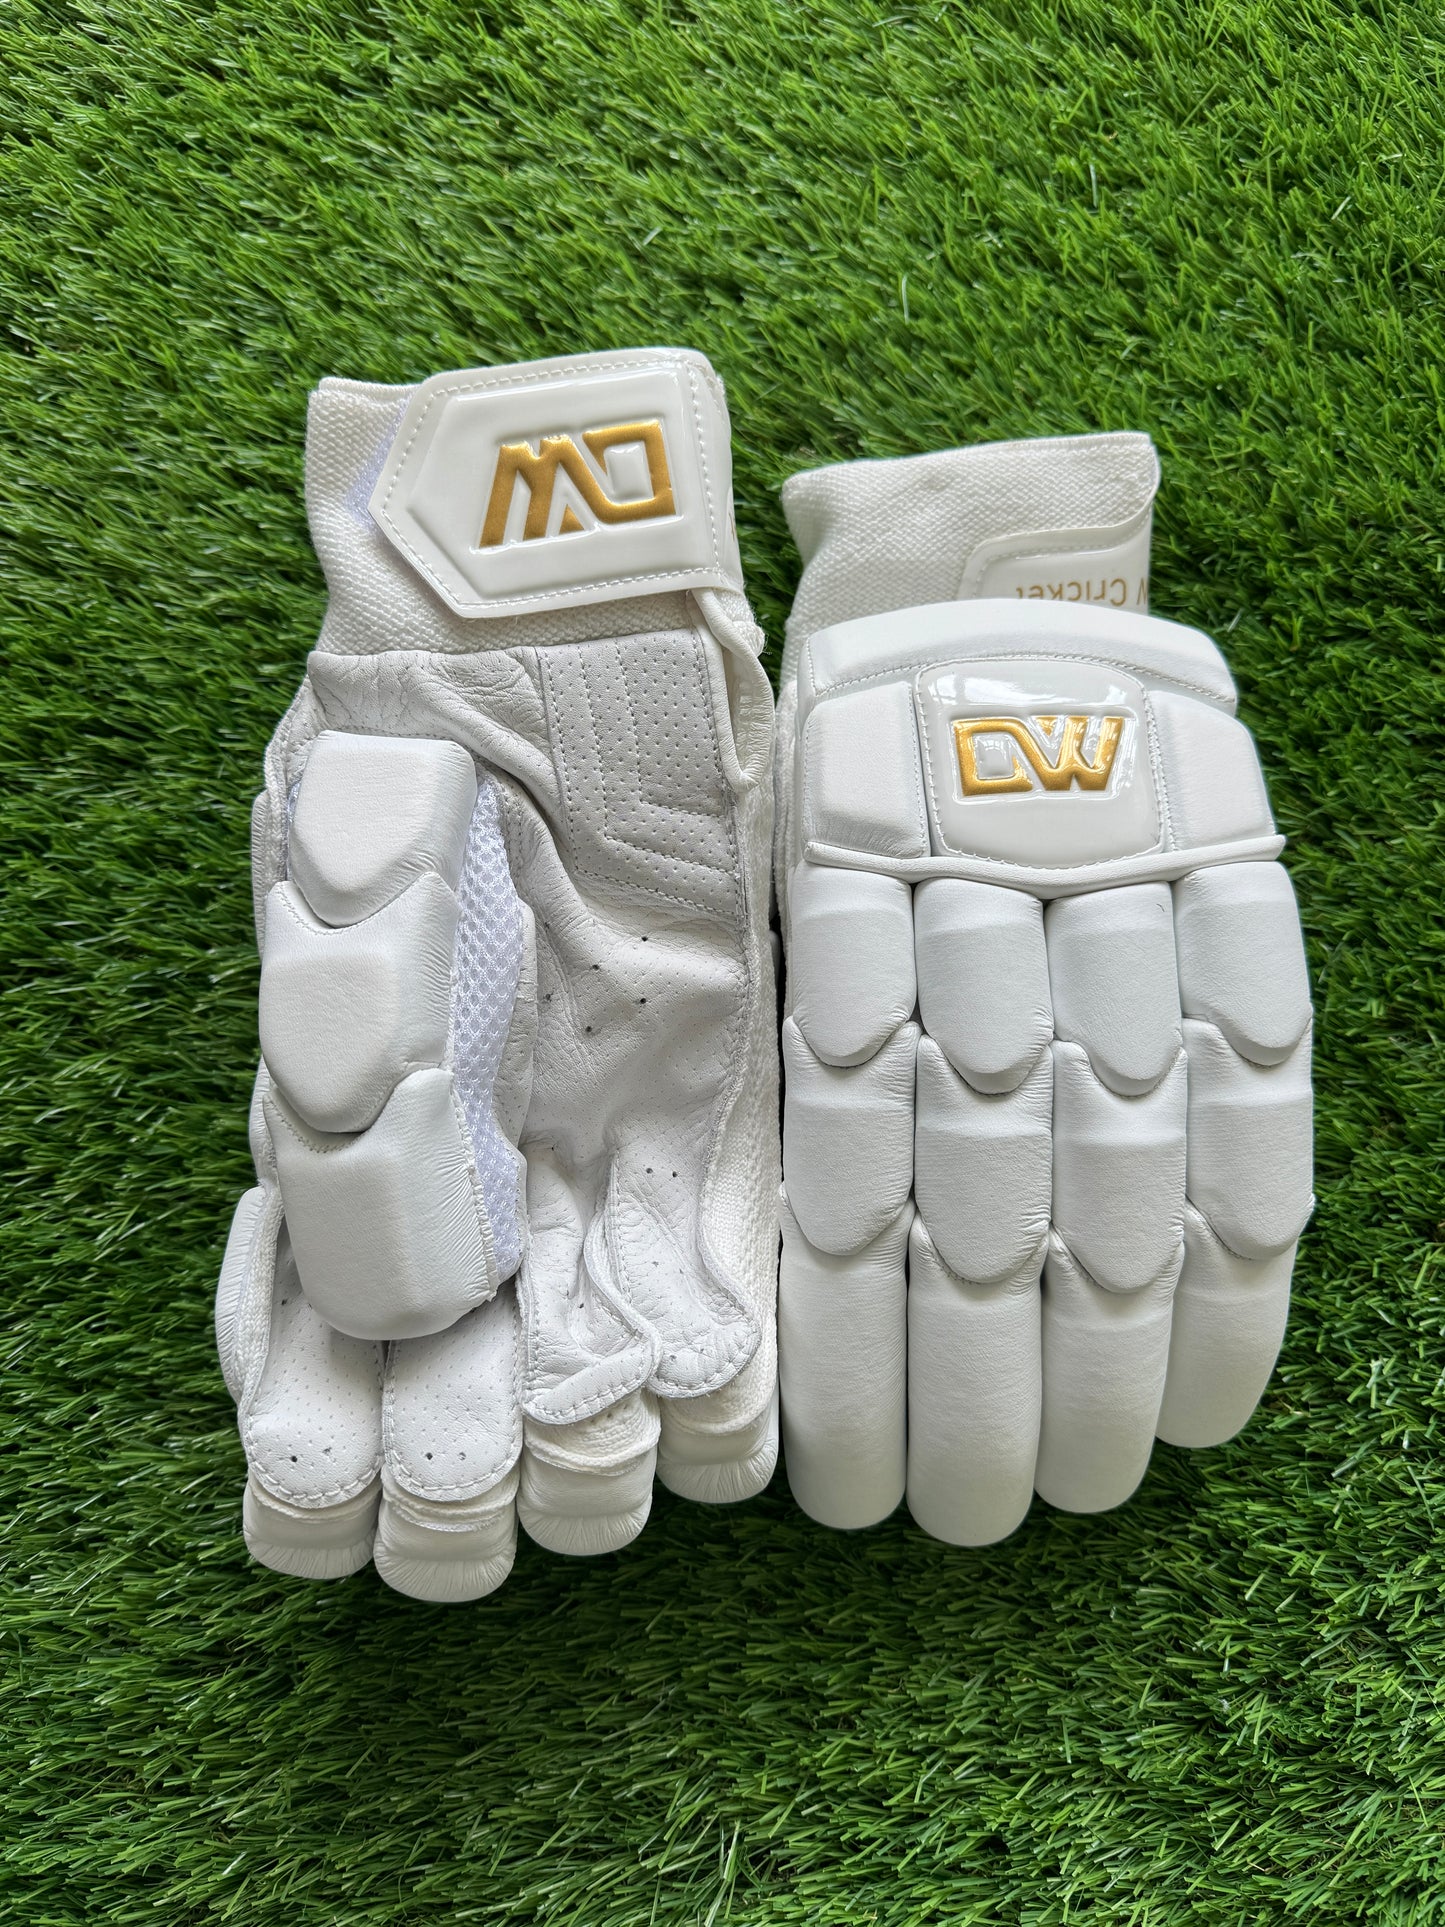 Players Edition Batting Gloves